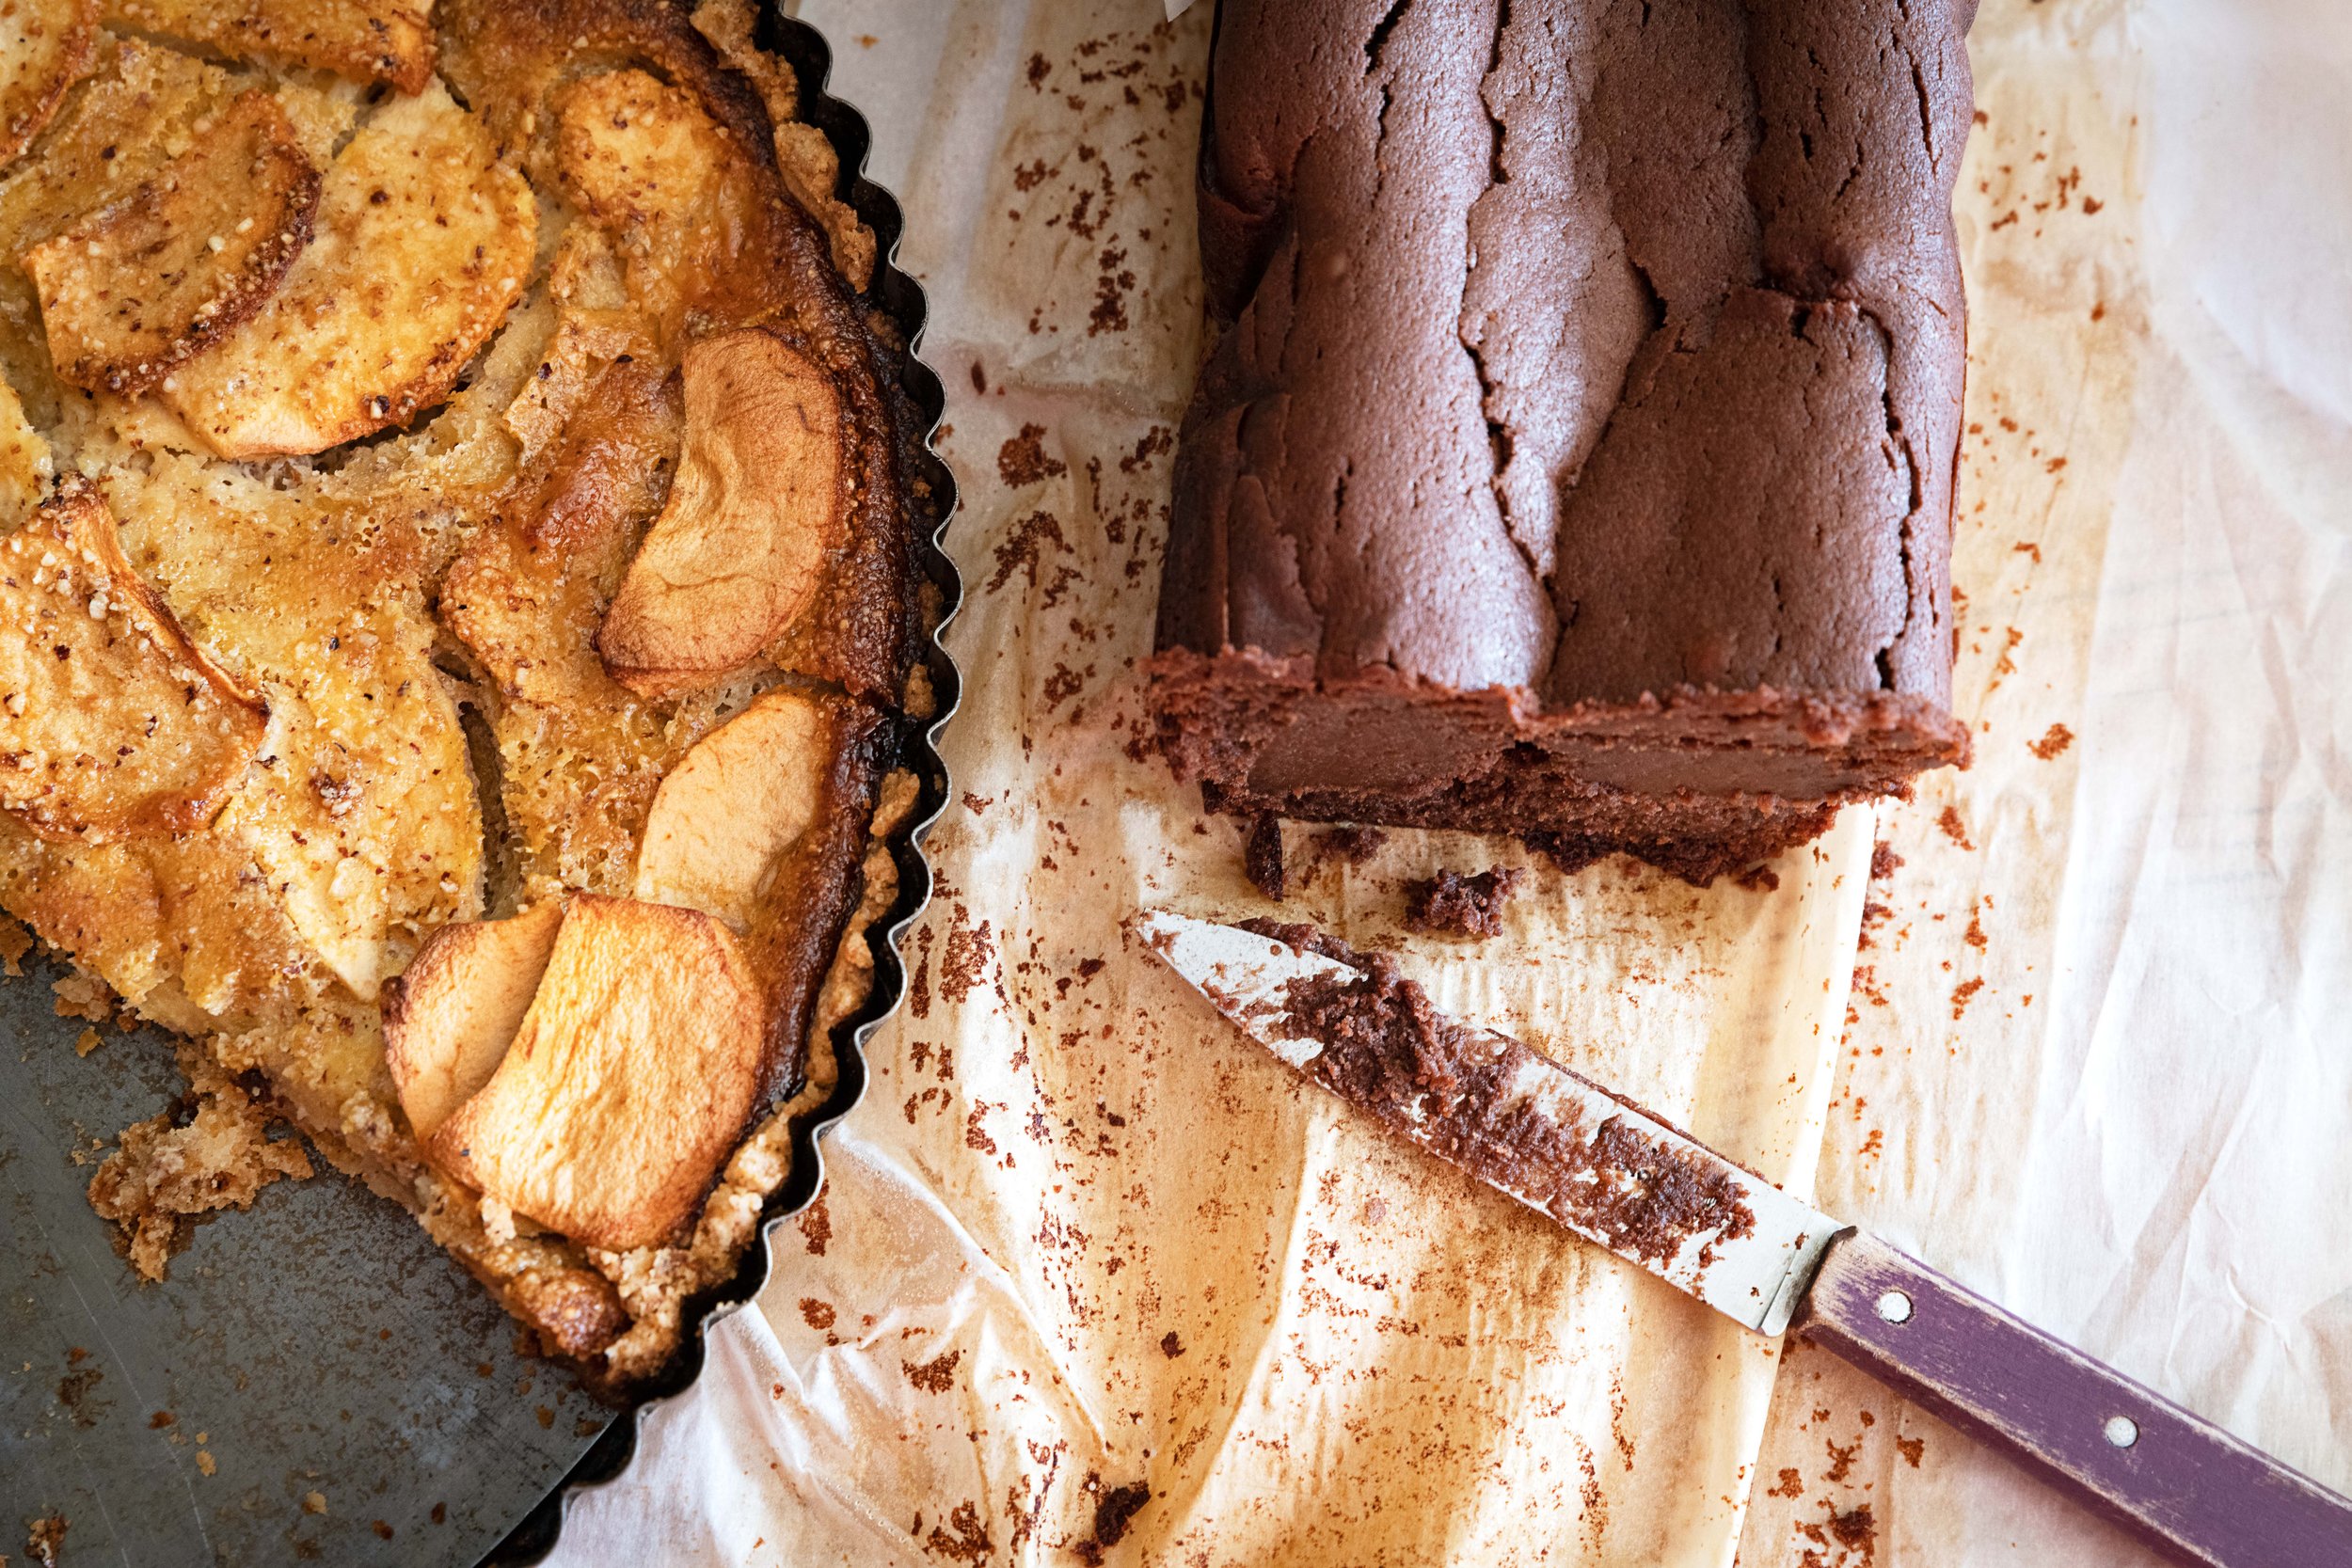 apple pie and chocolate cake in the kitchen